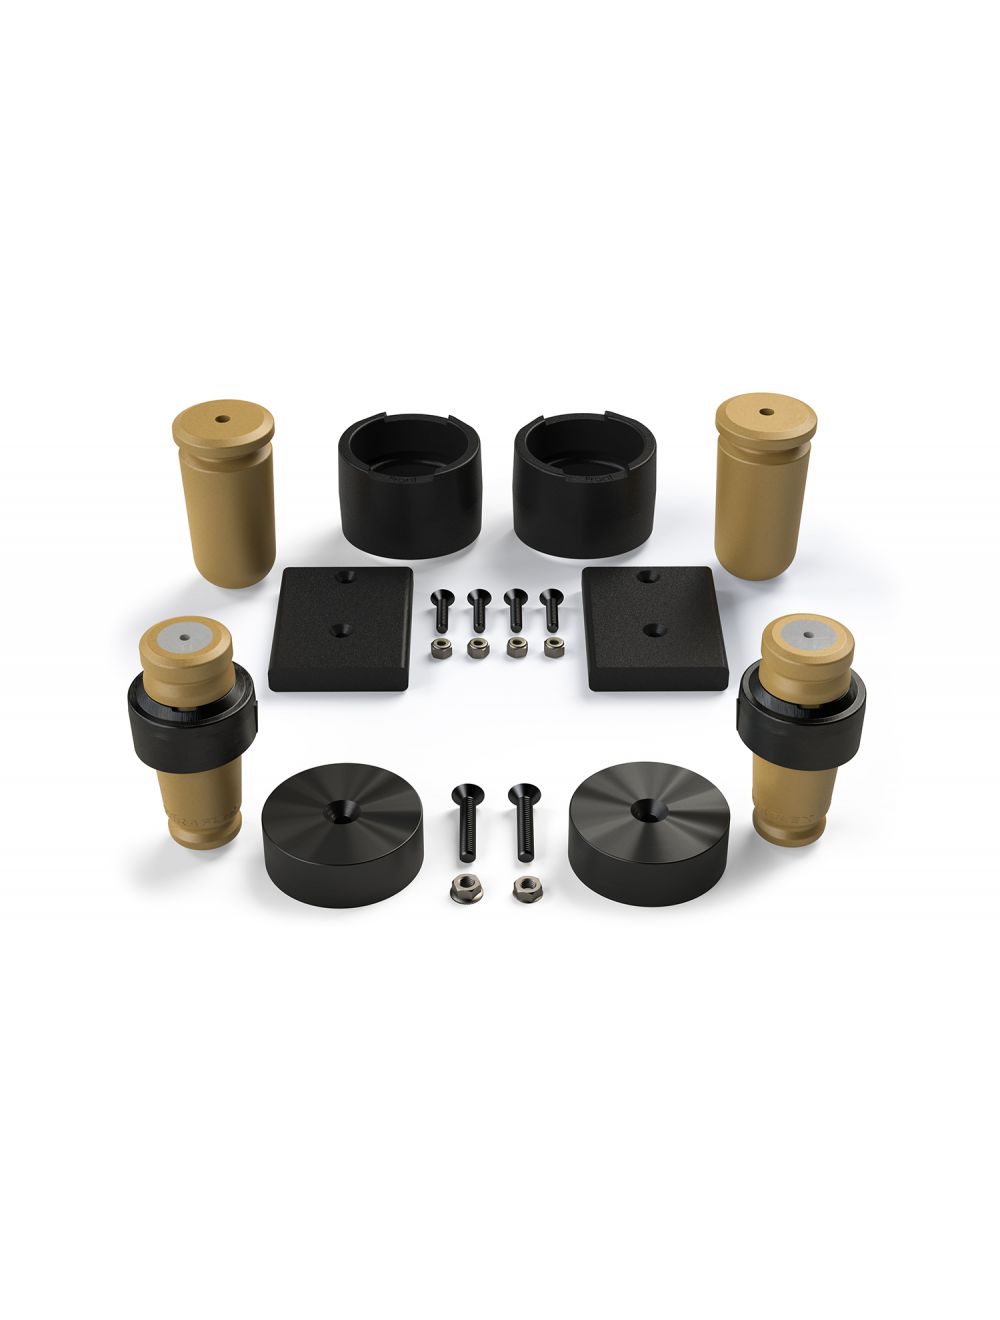 TeraFlex 1958252 JK Rear Bump stop Kit For 2.5 Lift with Extended Microcellular Foam and Axle Pad 1 Pack 